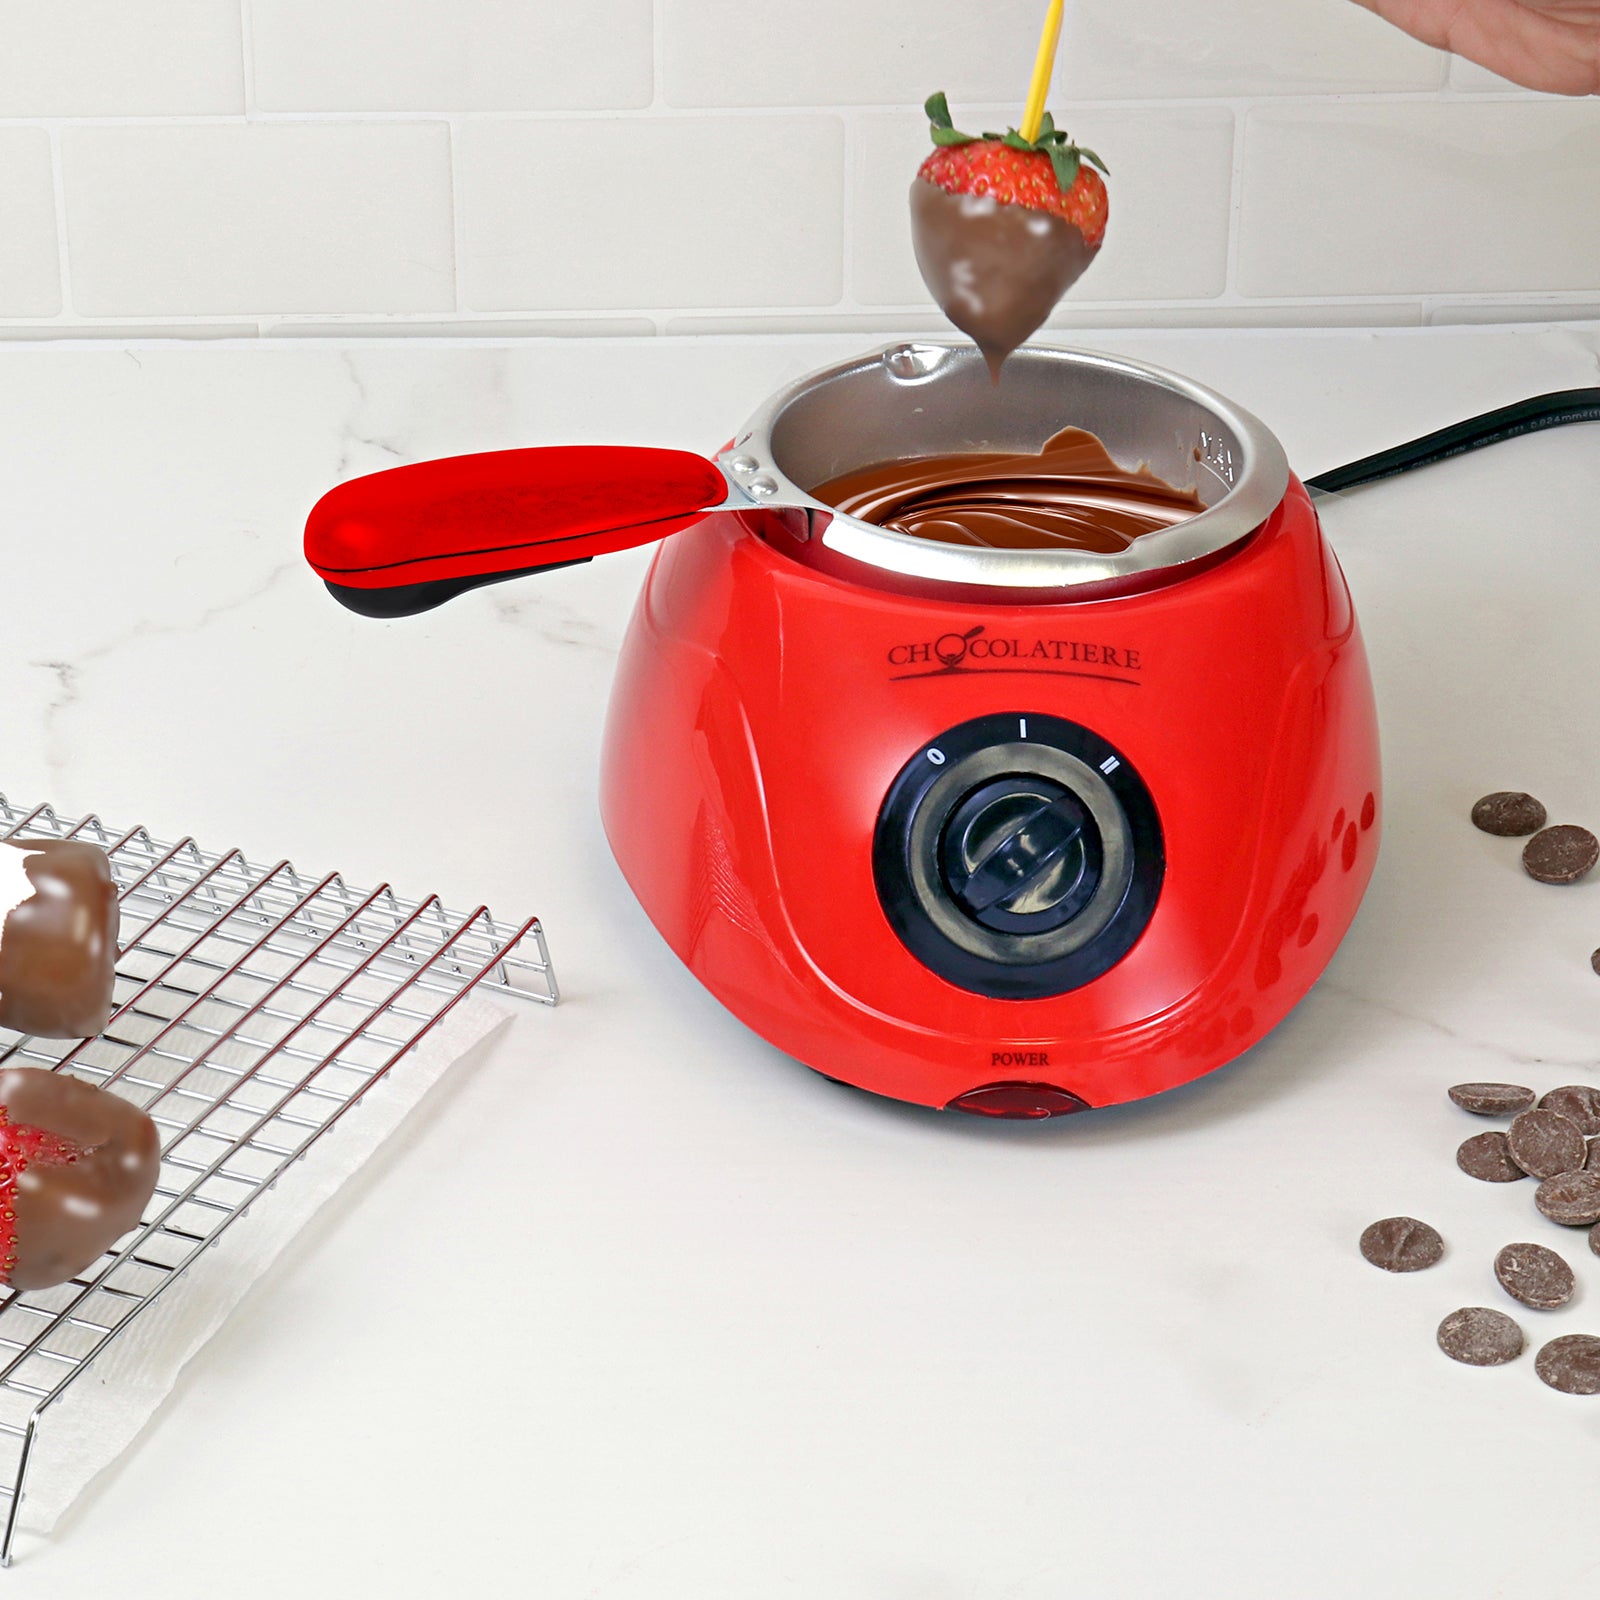 Total Chef Chocolatiere Chocolate Melter and Fondue Pot, 8.8 oz (250 g)